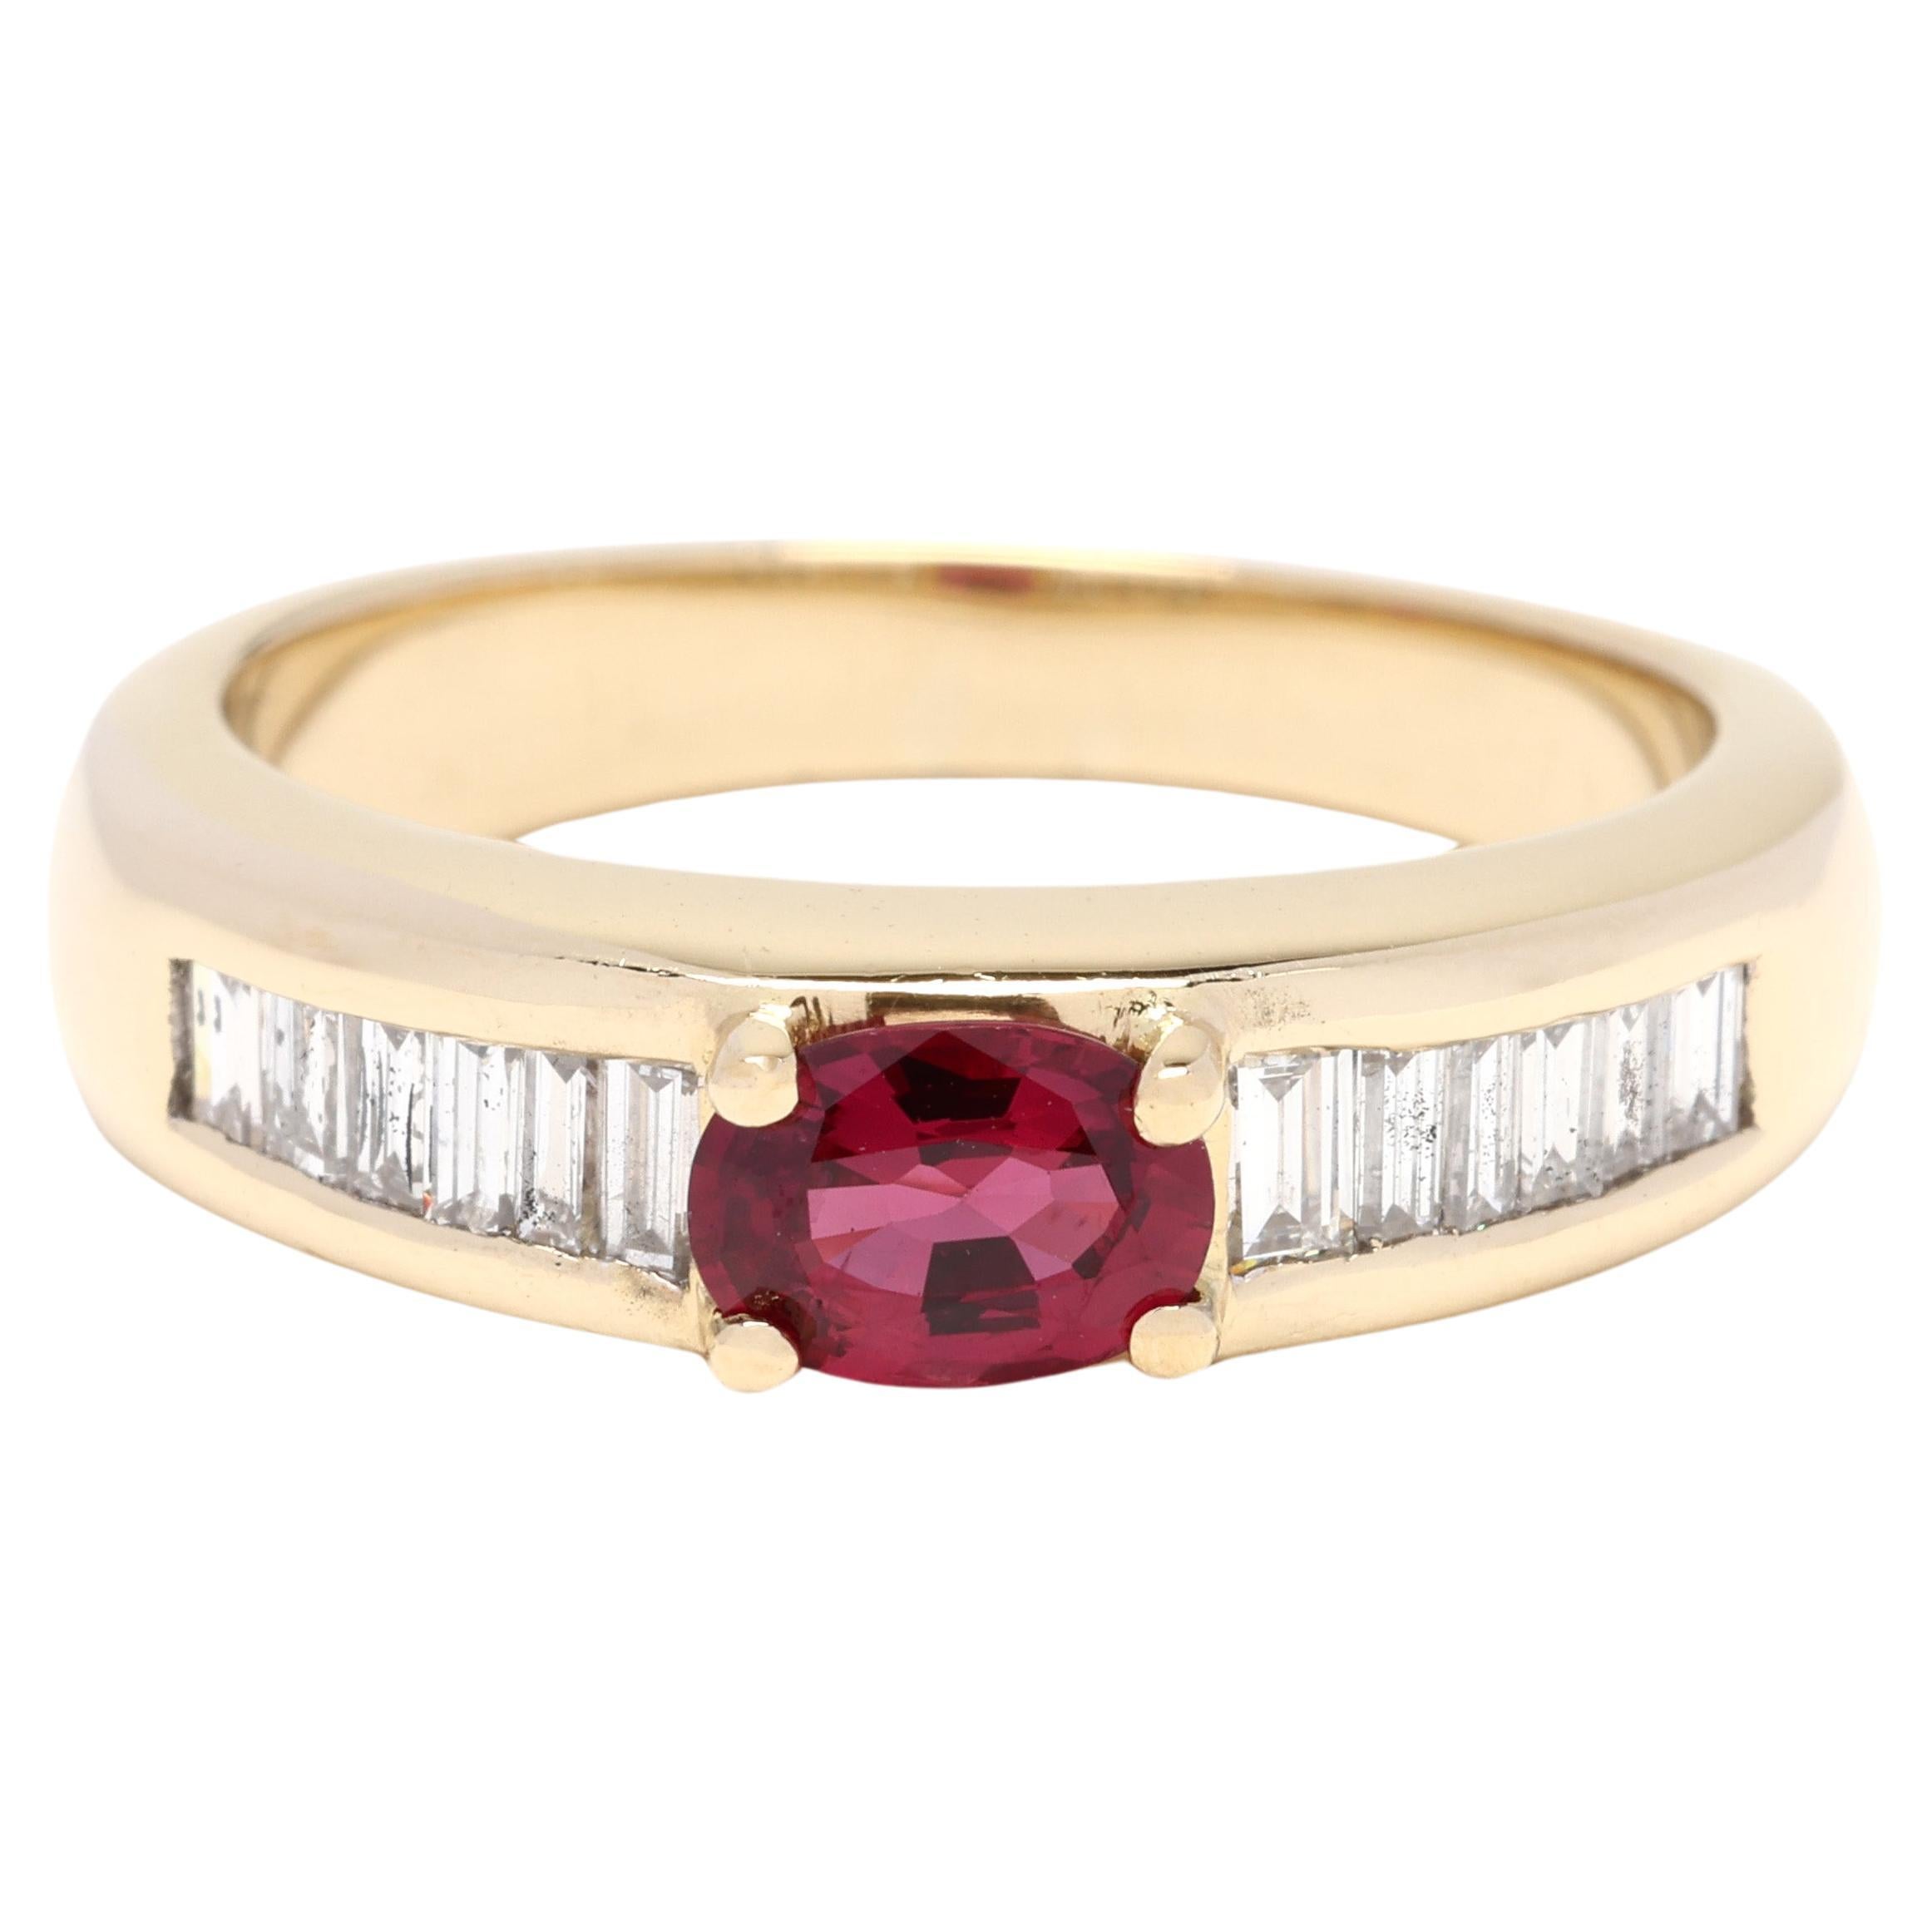 1.2ctw Diamond and Ruby Engagement Ring, 18k Yellow Gold, Ring Size 6.75 For Sale